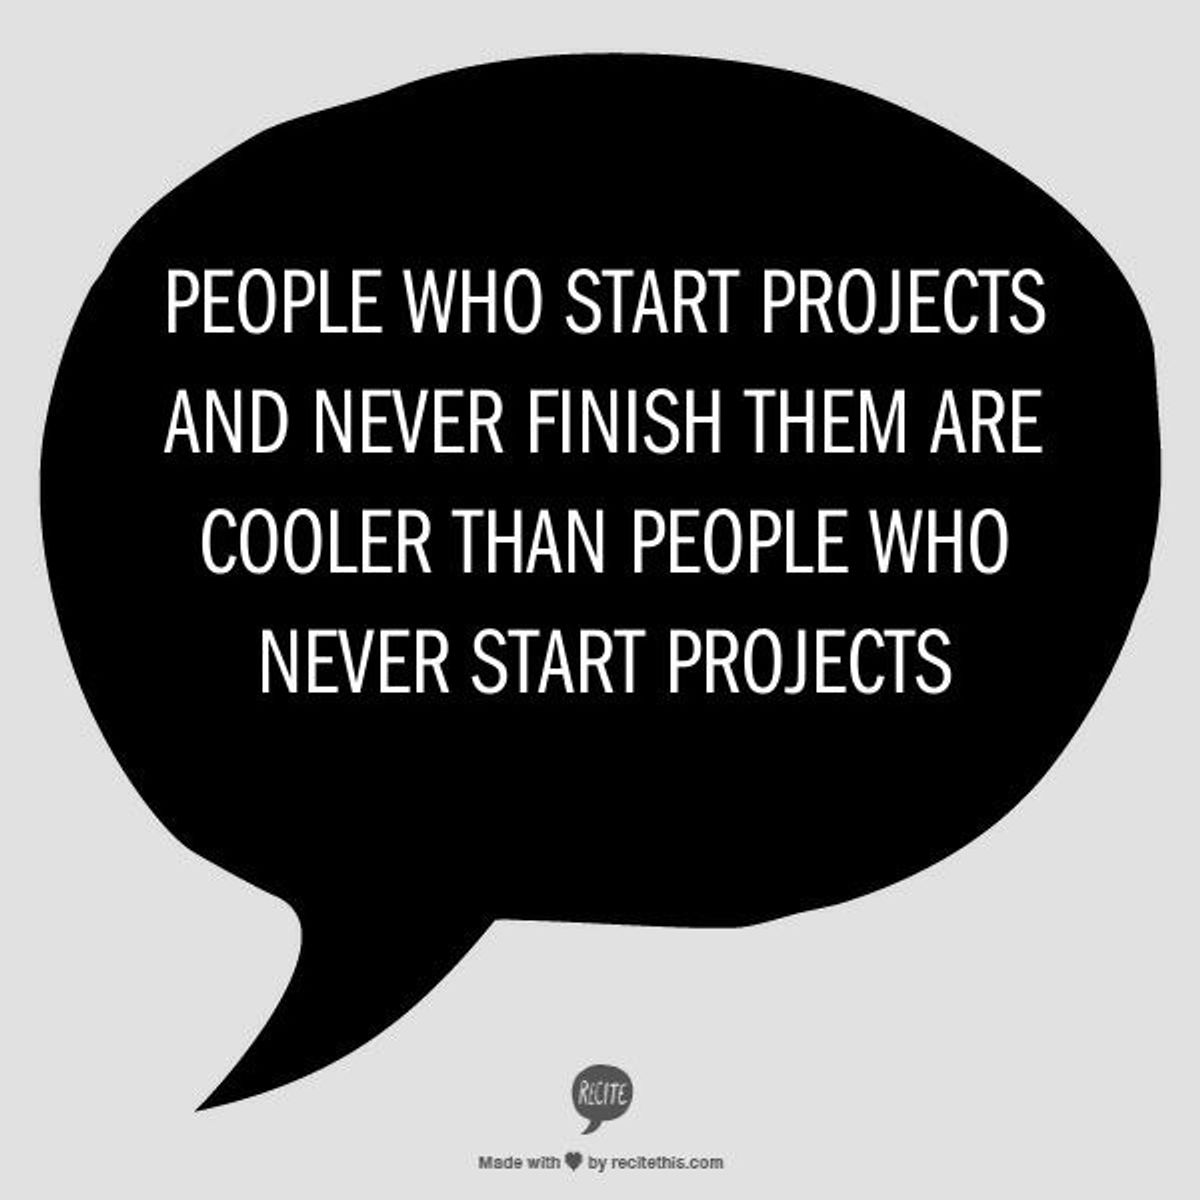 The 11 Tips for A Successful Big Project